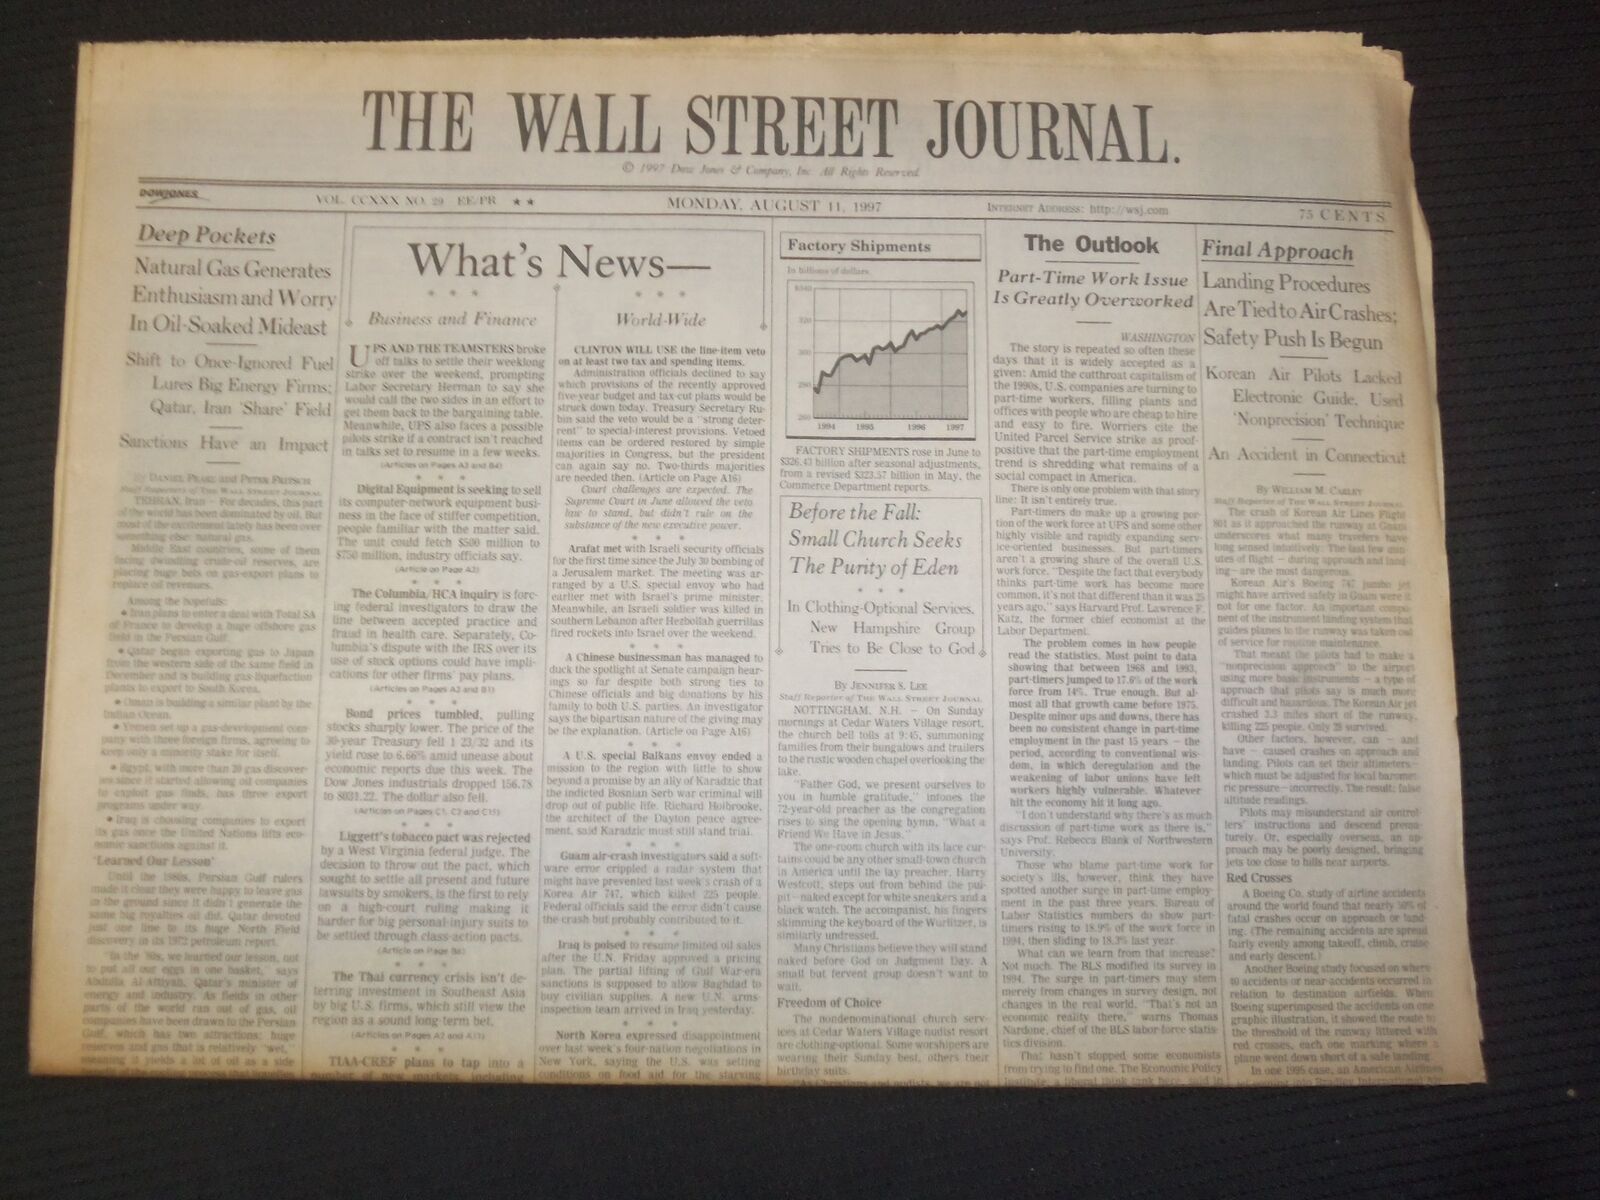 1997 AUG 11 THE WALL STREET JOURNAL - NATURAL GAS GENERATES ENTHUSIASM - WJ 202